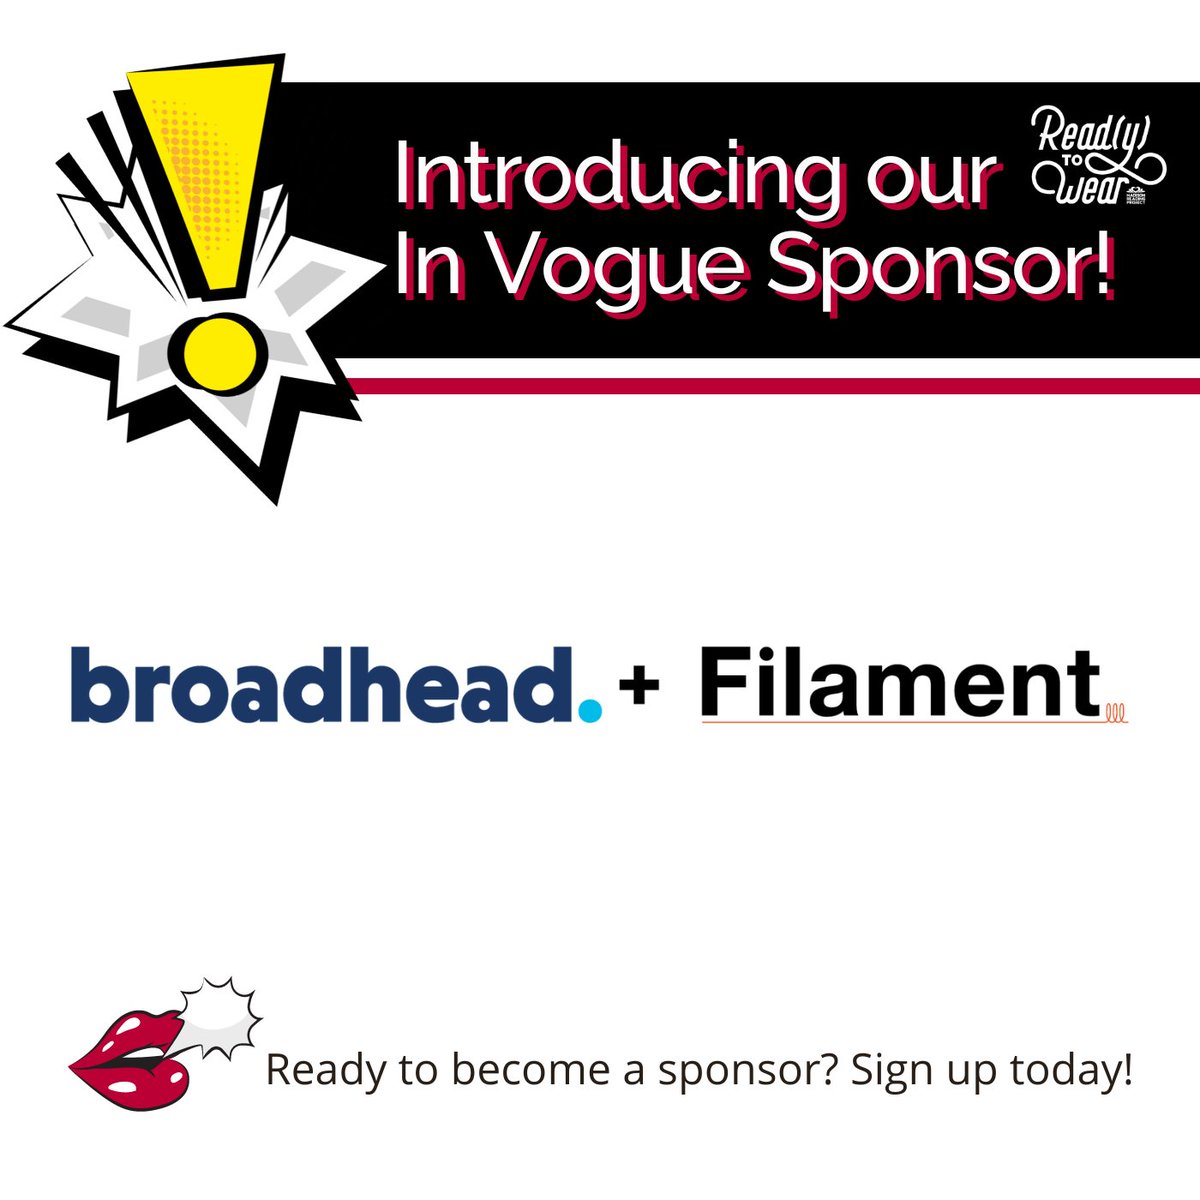 🎉 We are delighted that Broadhead and Filament have signed up as In Vogue Sponsors for our 2024 Read(y) to Wear event on June 12th!⁠
⁠
⭐️ Find more information on our website at madisonreadingproject.com/readytowear
⁠
#PaperFashion #FashionFundraiser #MadisonWI #NewBookFeeling